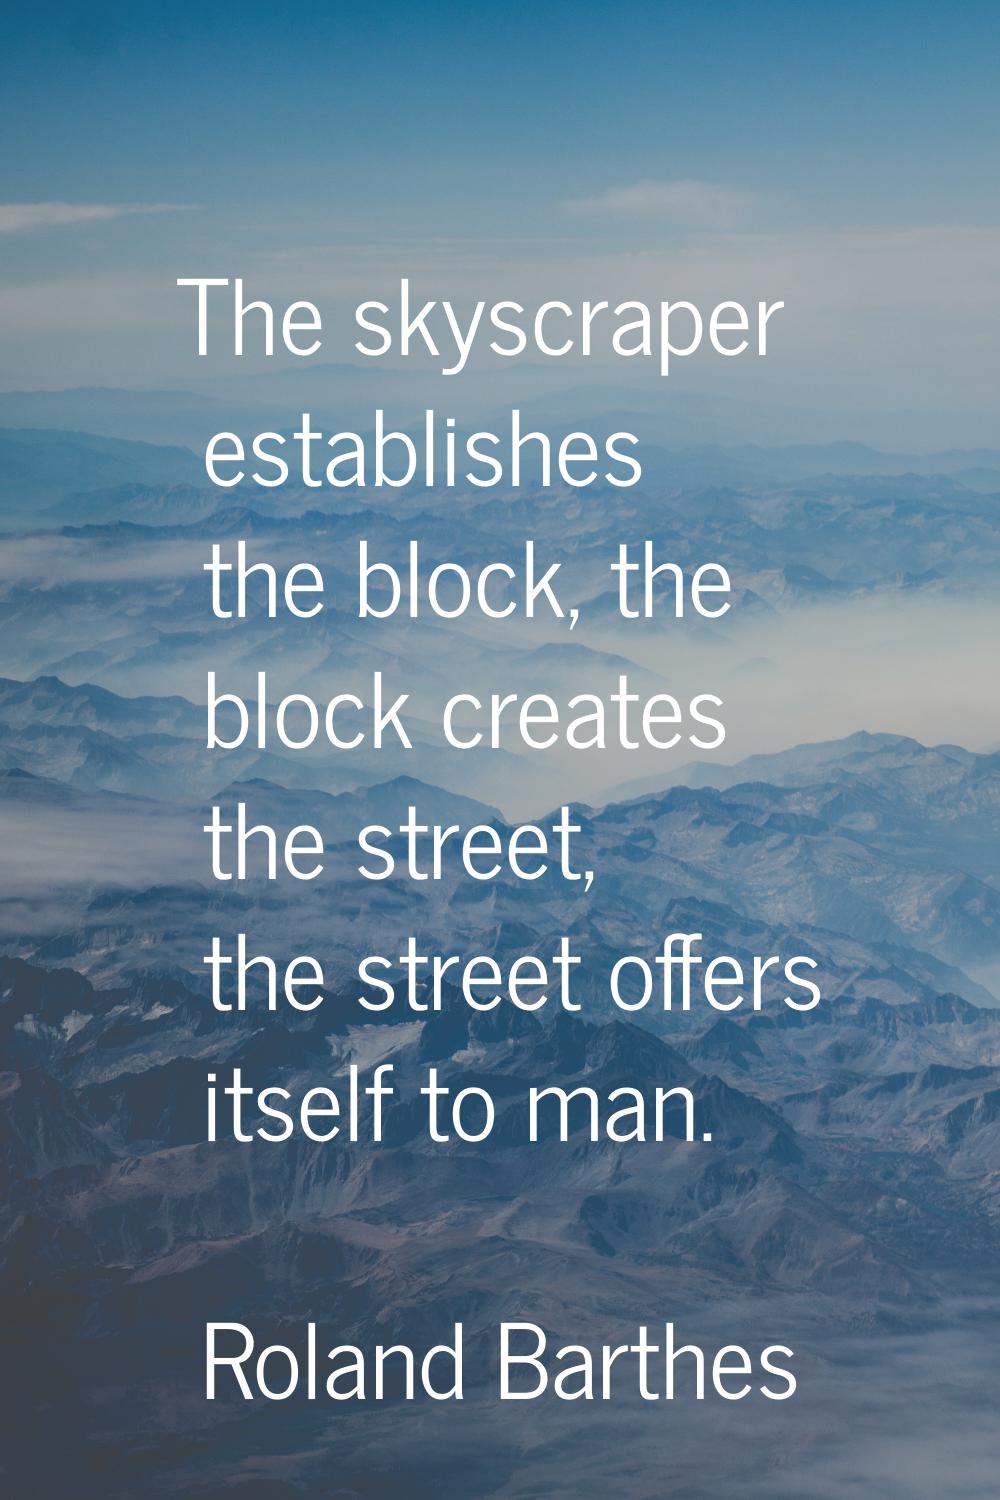 The skyscraper establishes the block, the block creates the street, the street offers itself to man